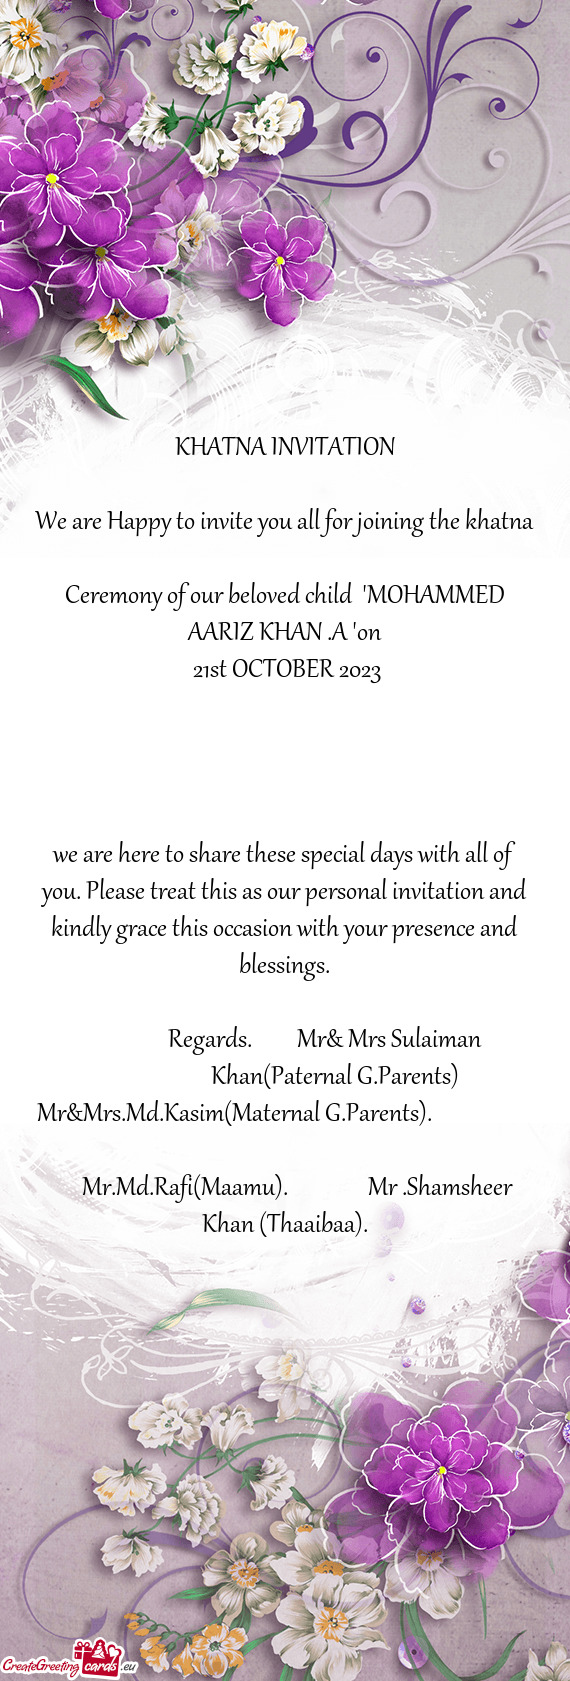 We are Happy to invite you all for joining the khatna Ceremony of our beloved child "MOHAMMED AARI